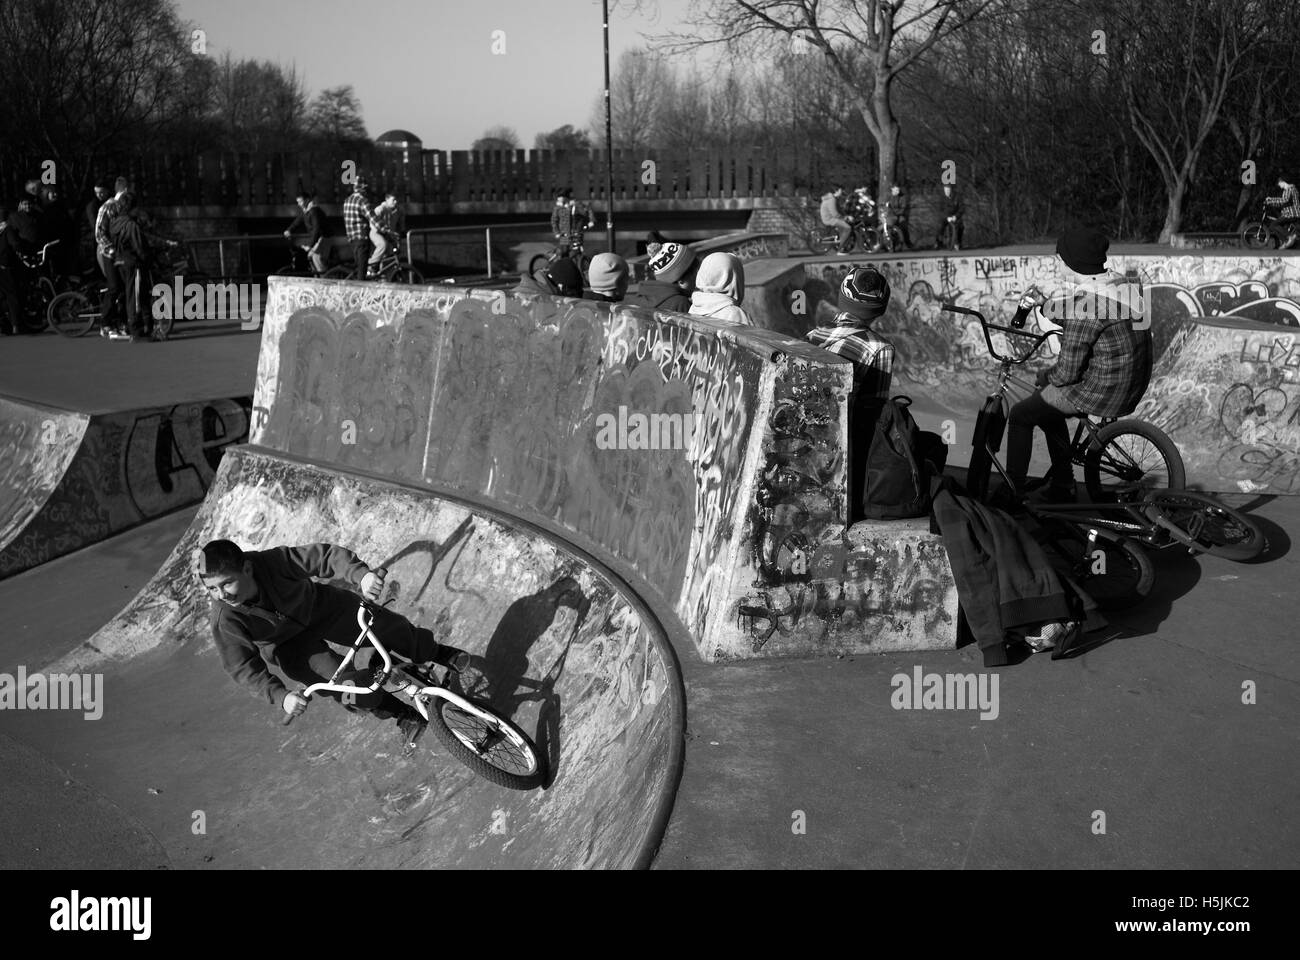 Cyclists and skateboarders at Exhibition Park skate bowl, Newcastle upon Tyne, England Stock Photo